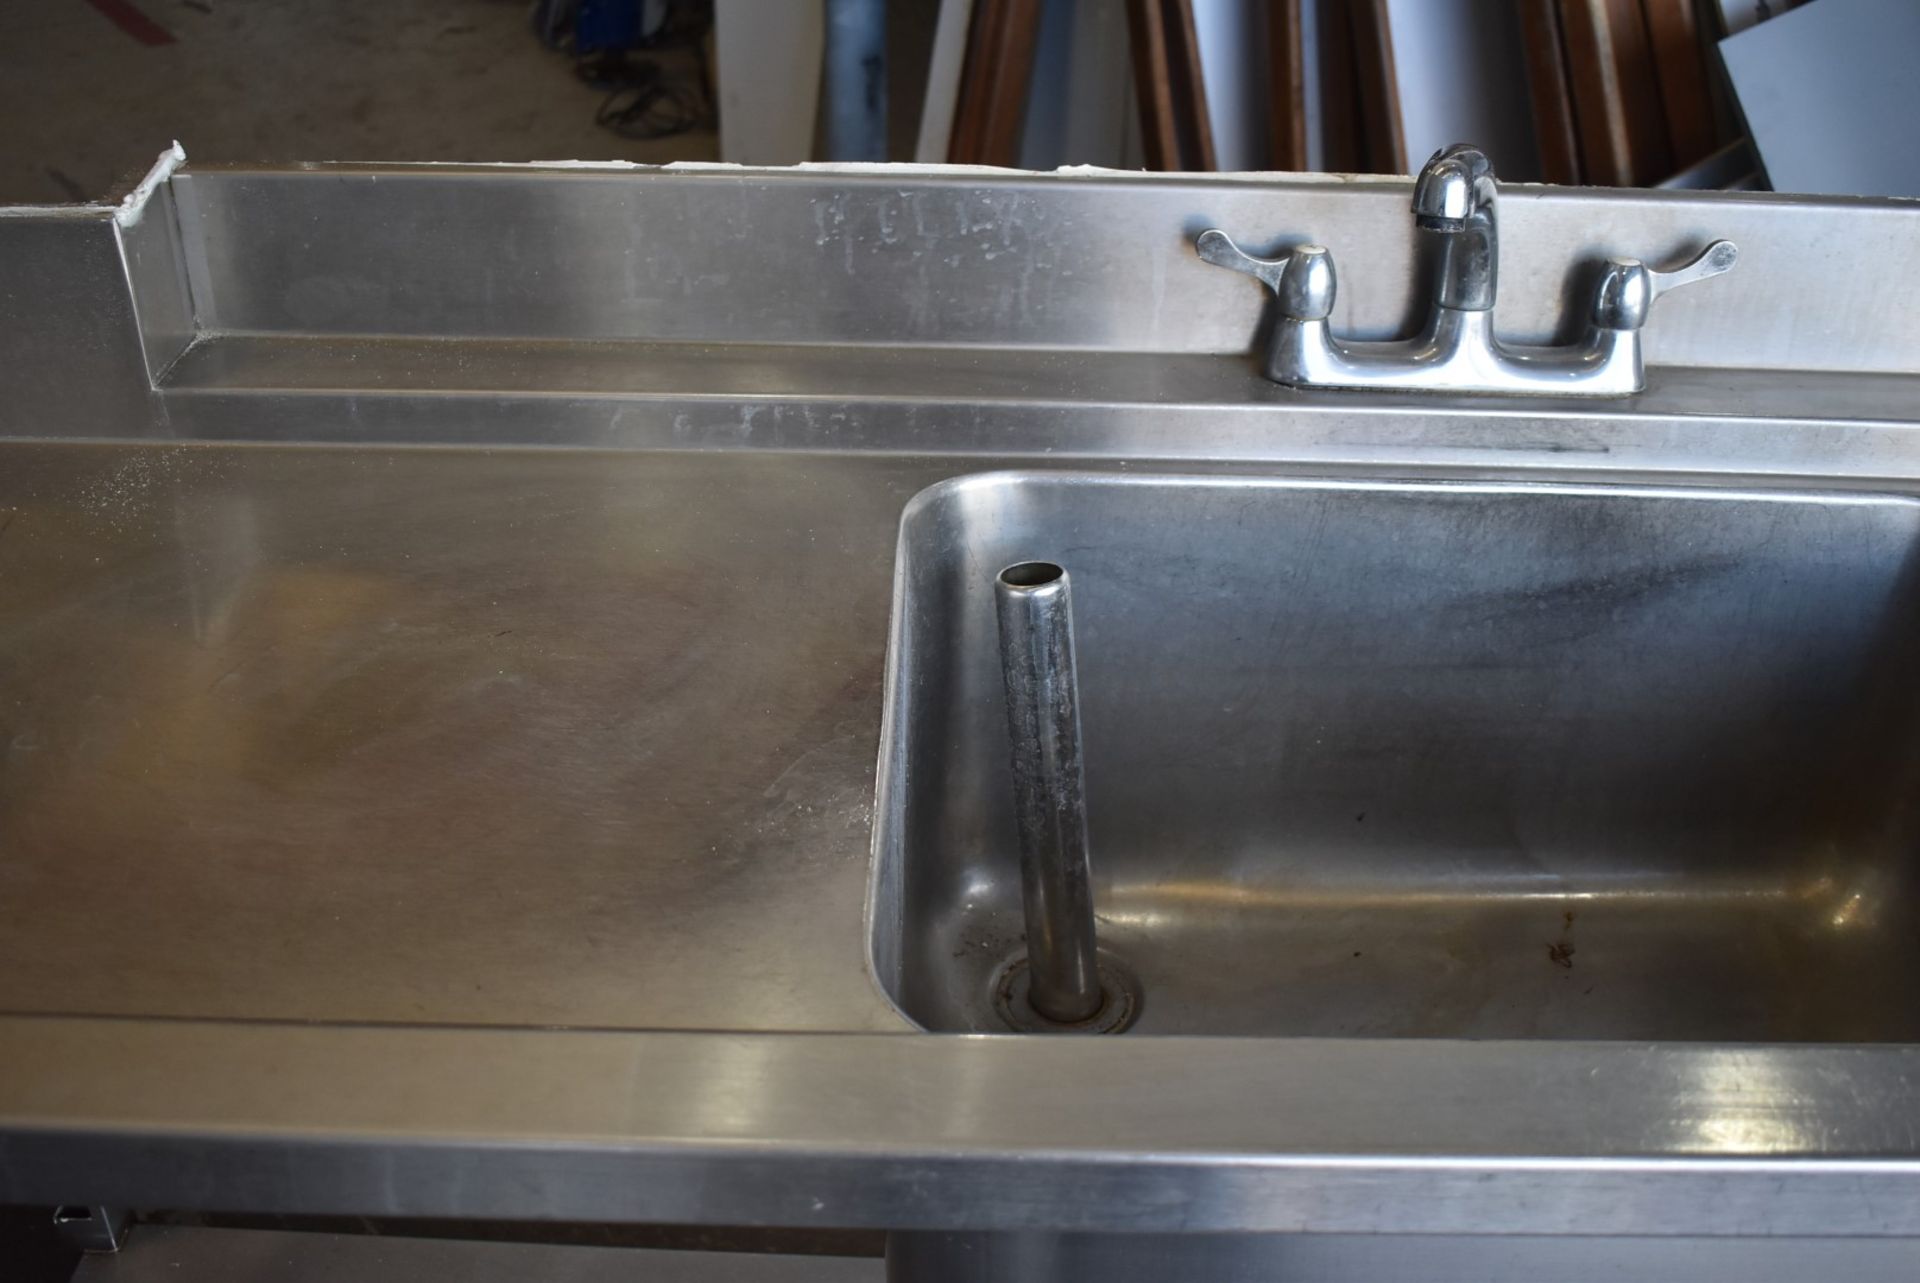 1 x Stainless Steel Wash Unit With Single Basin, Mixer Tap, Undershelf, Corner Upstand - Width 190cm - Image 5 of 11